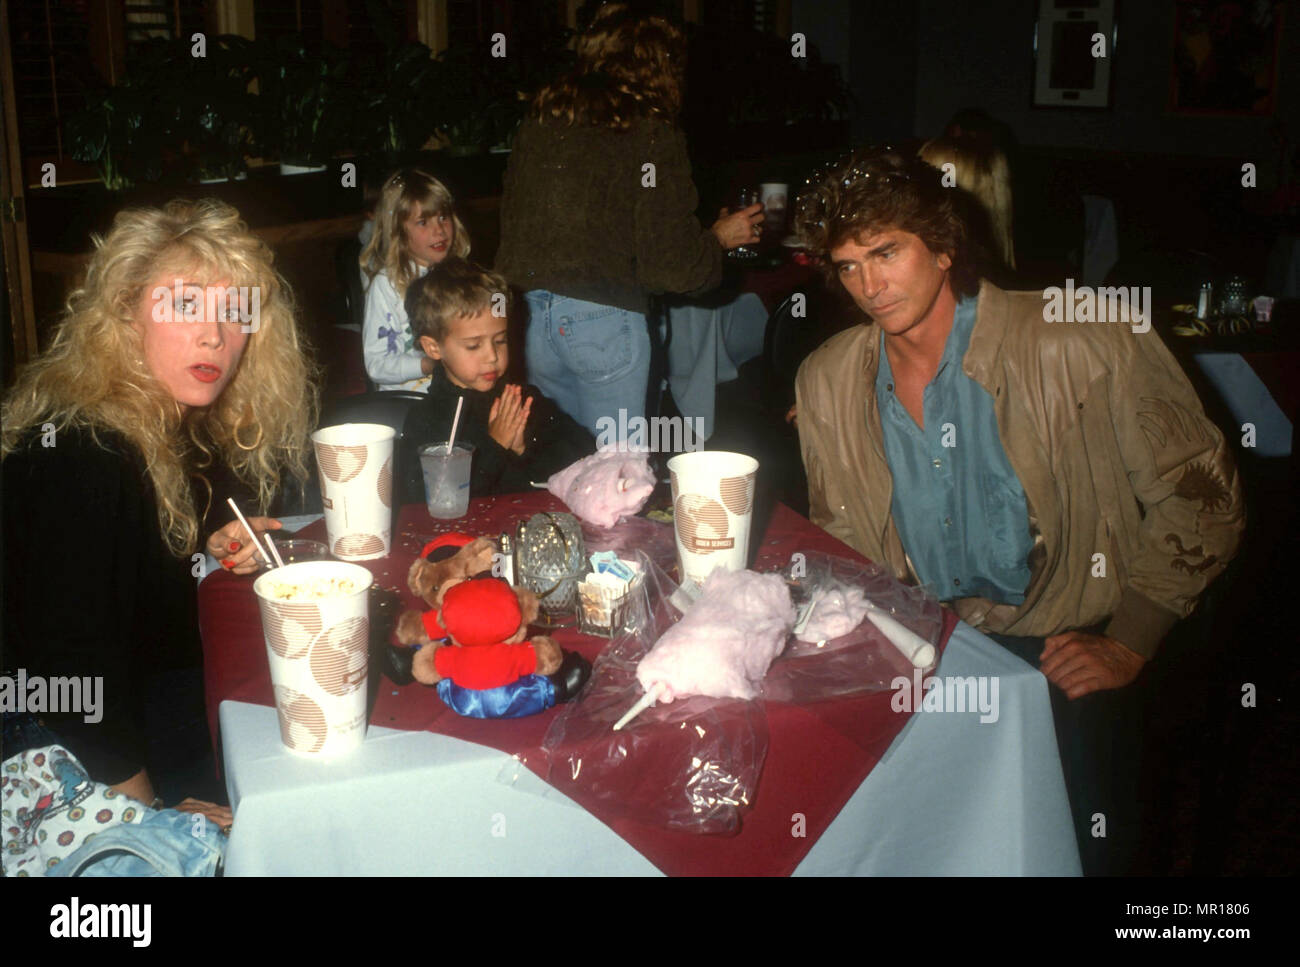 INGLEWOOD, CA - MARCH 6: Actor Michael Landon (R) son Sean Landon, wife Cindy Landon (L) and daughter Jennifer Landon attend the Moscow Circus Opening Night Performance on March 6, 1991 at the Great Western Forum in Inglewood, California. Photo by Barry King/Alamy Stock Photo Stock Photo